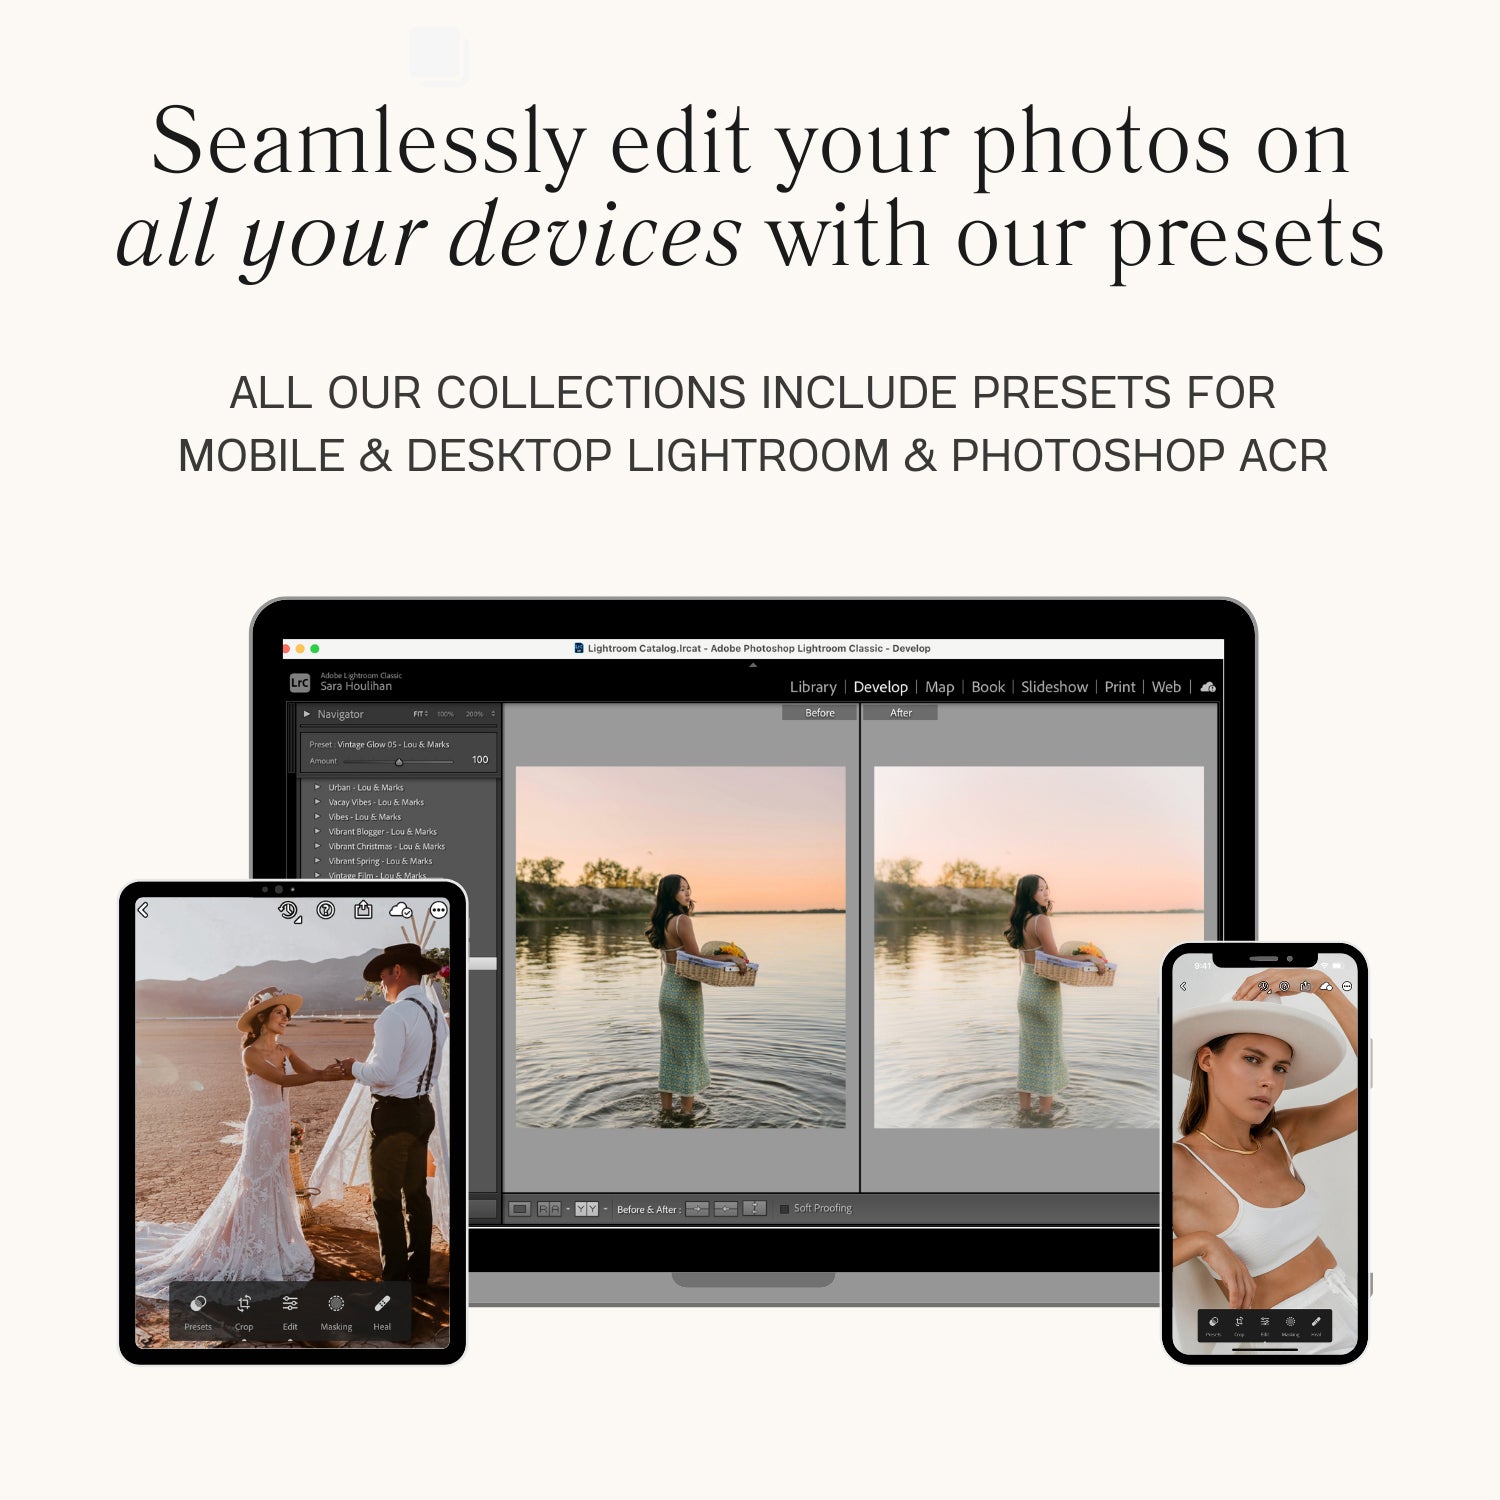 Adobe Food Photography Lightroom Presets The Best Photo Editing Preset Filters For Lightroom Mobile And Desktop For Photographers and Instagram Influencers By Lou And Marks Presets